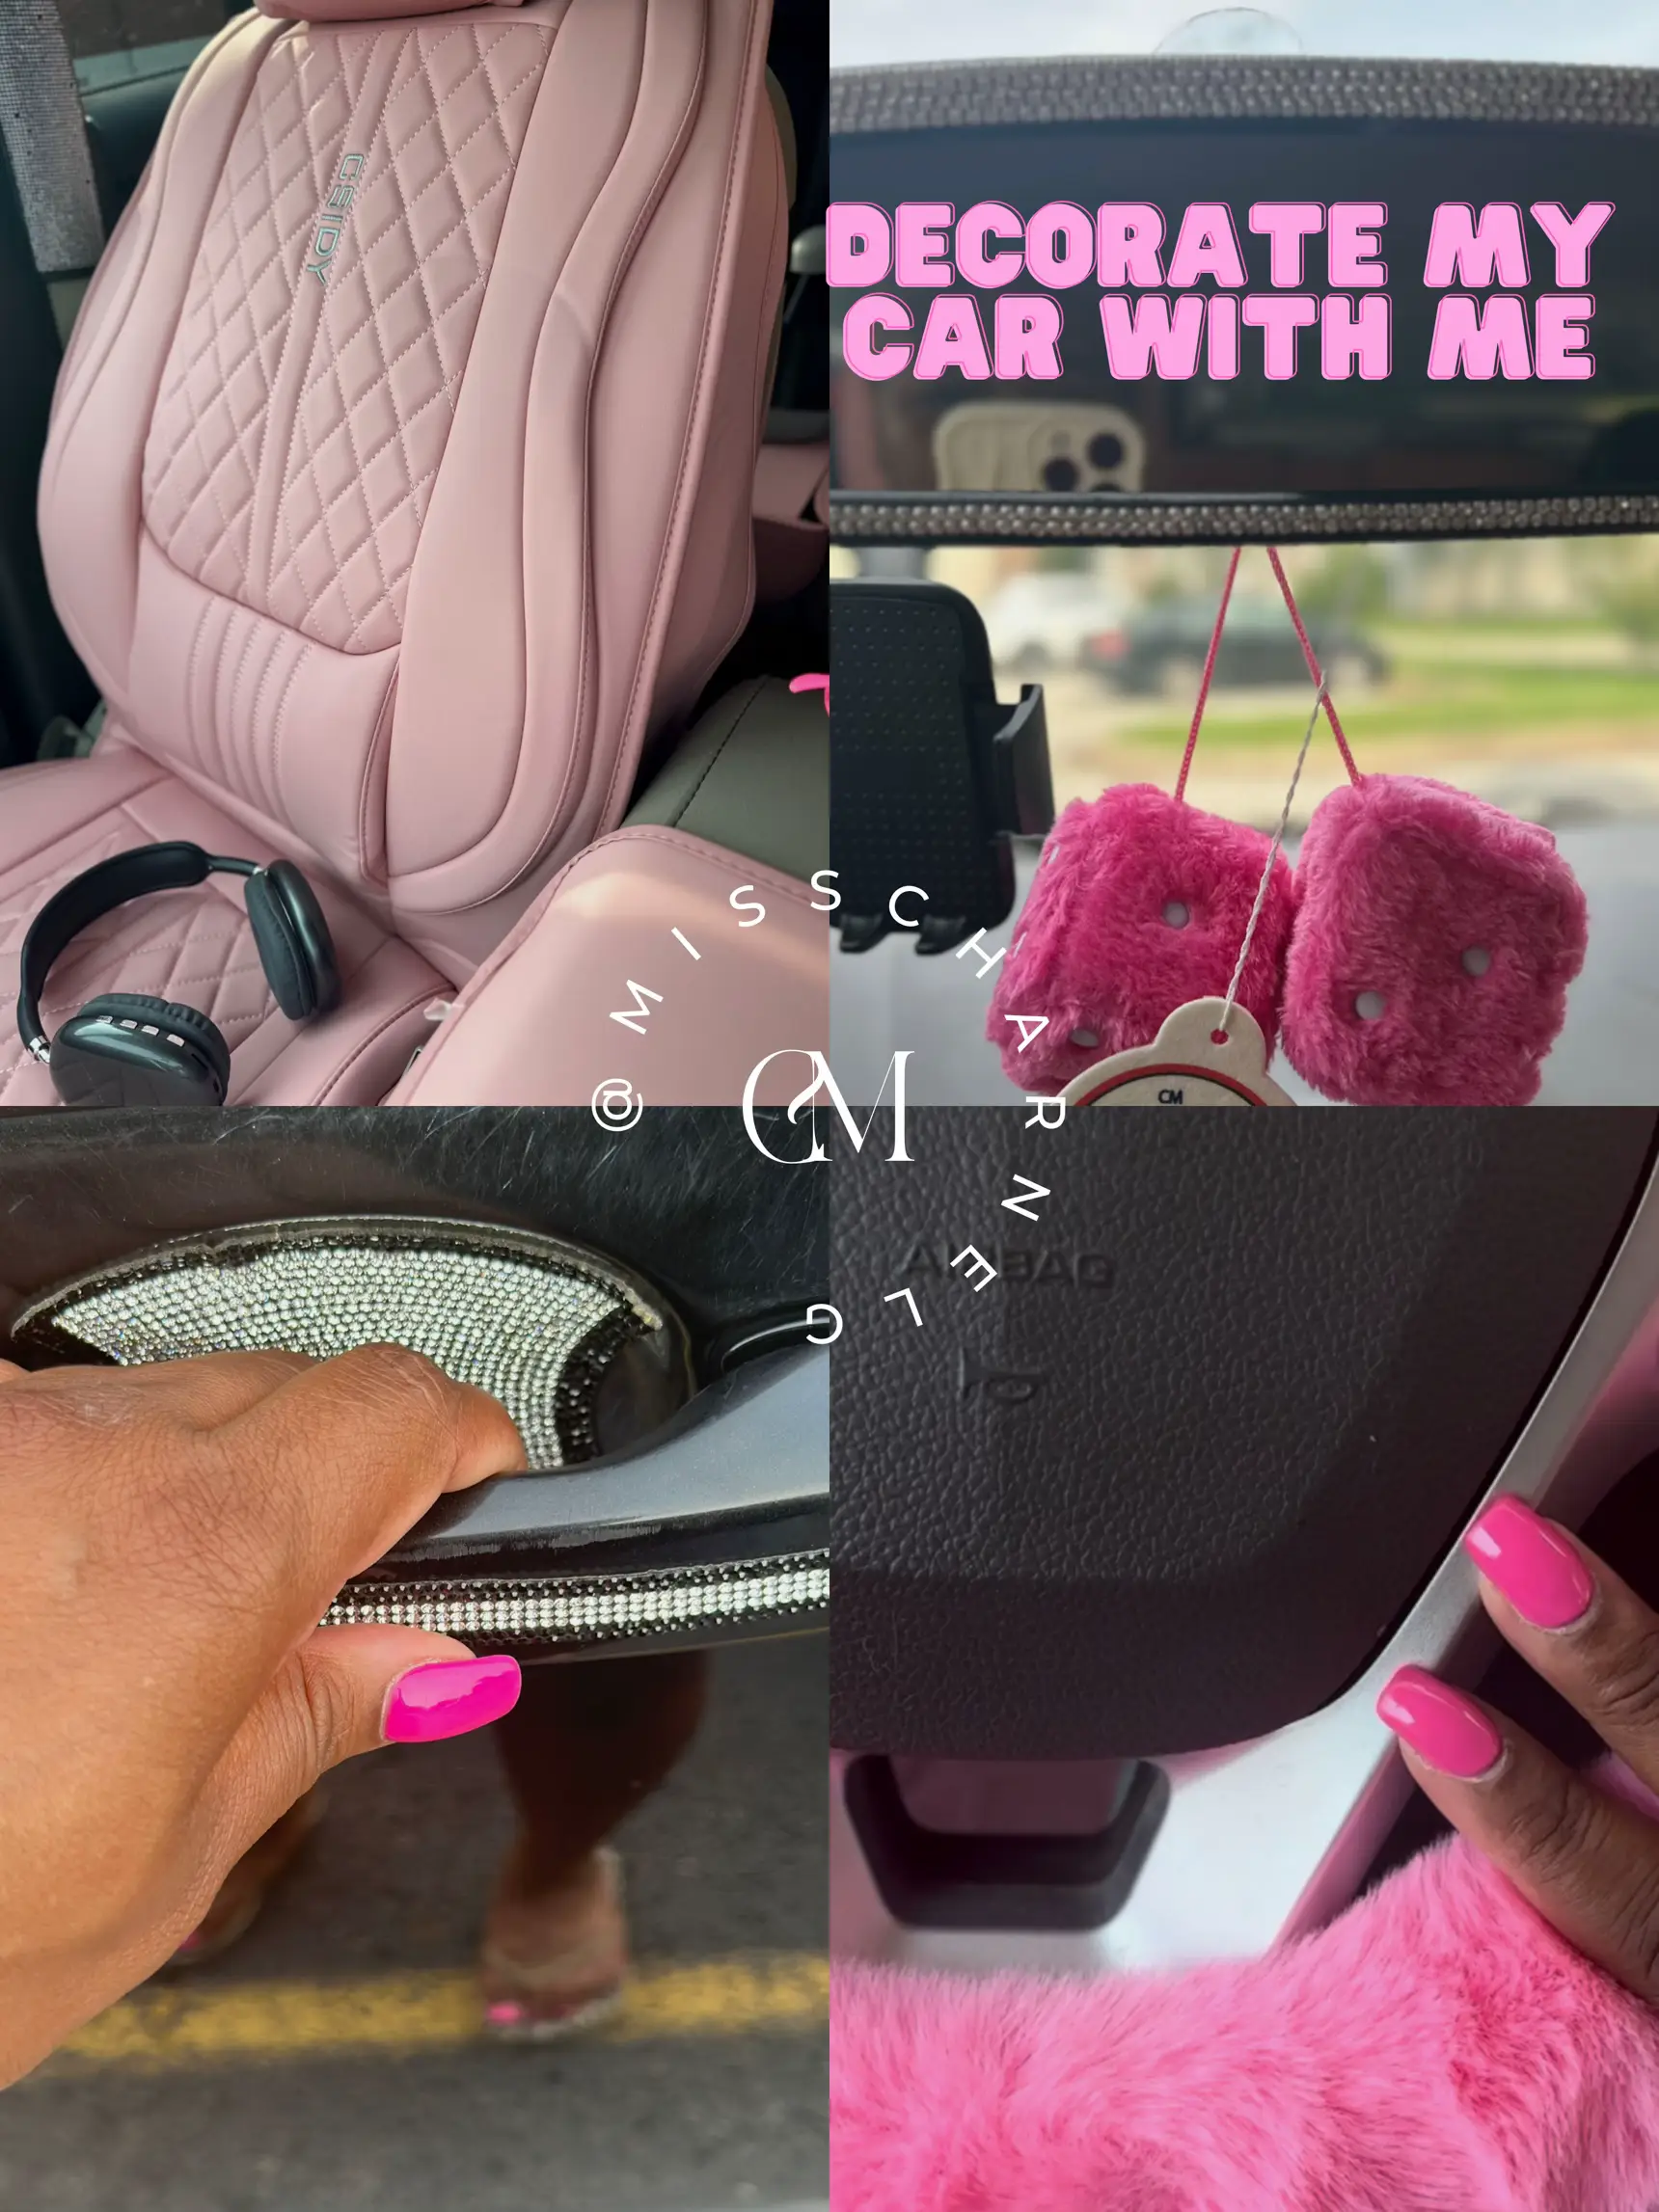 luxurious pink car seat covers - Lemon8 Search